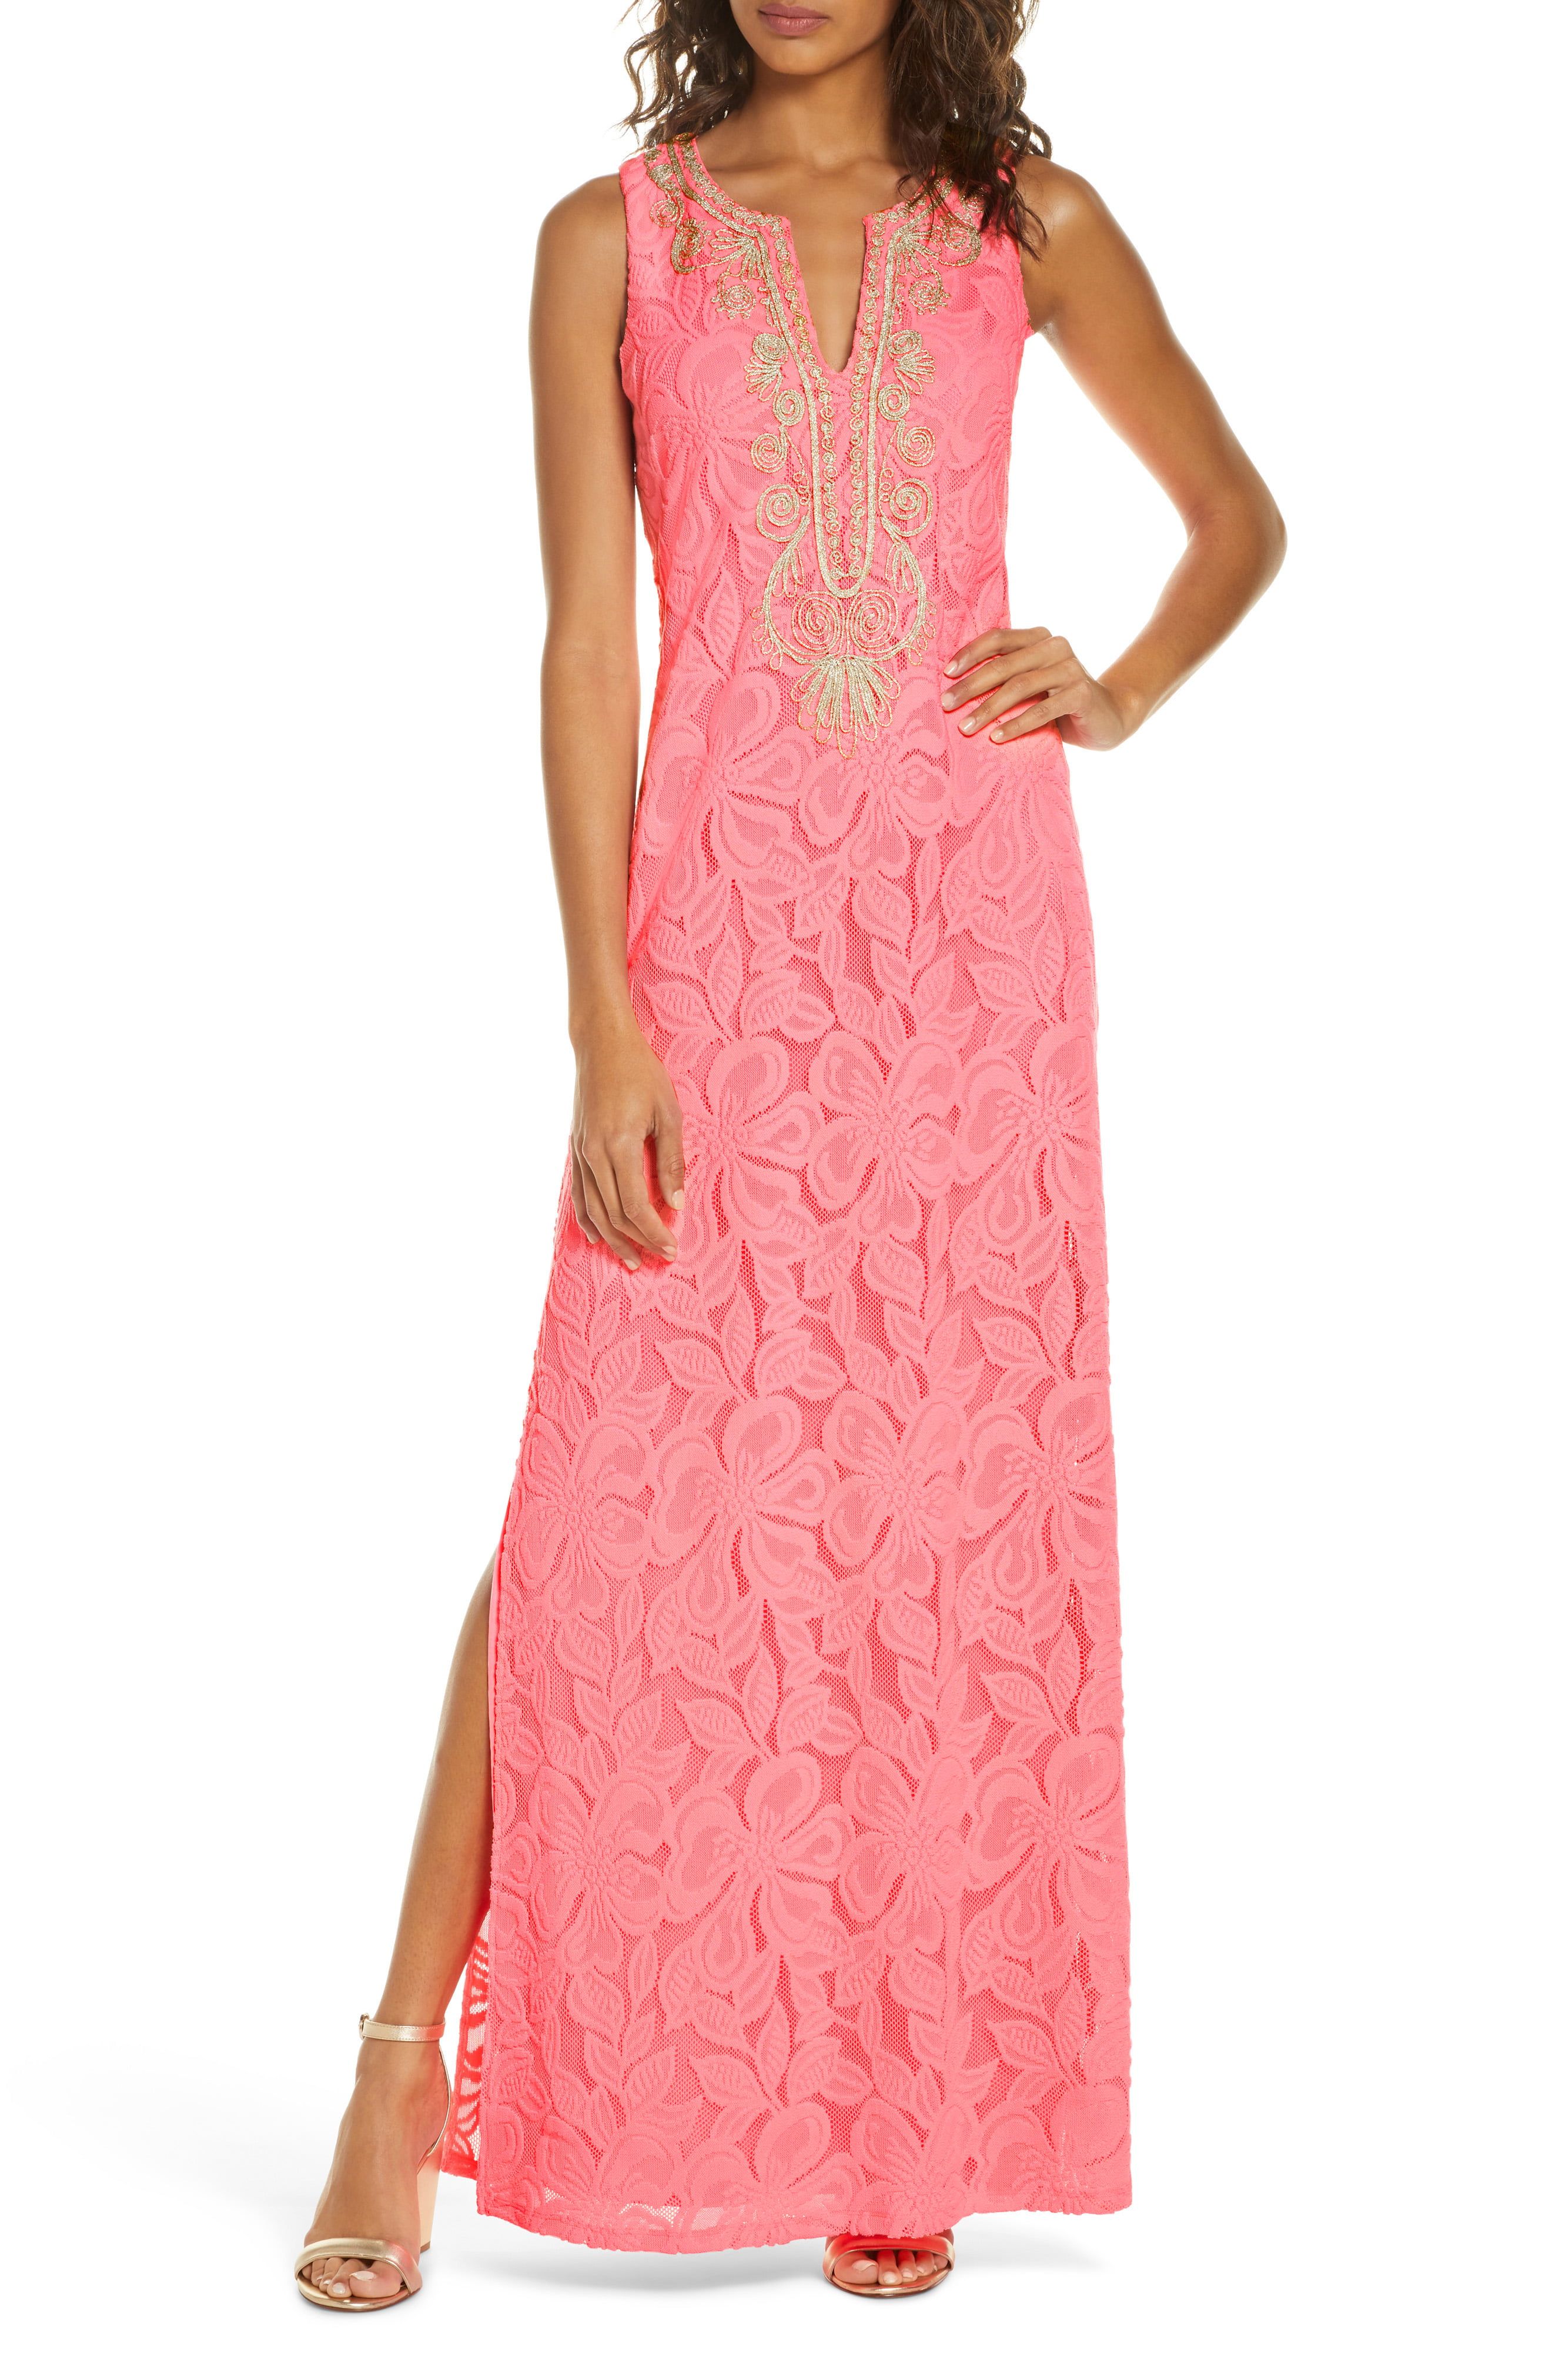 dresses to wear to summer weddings